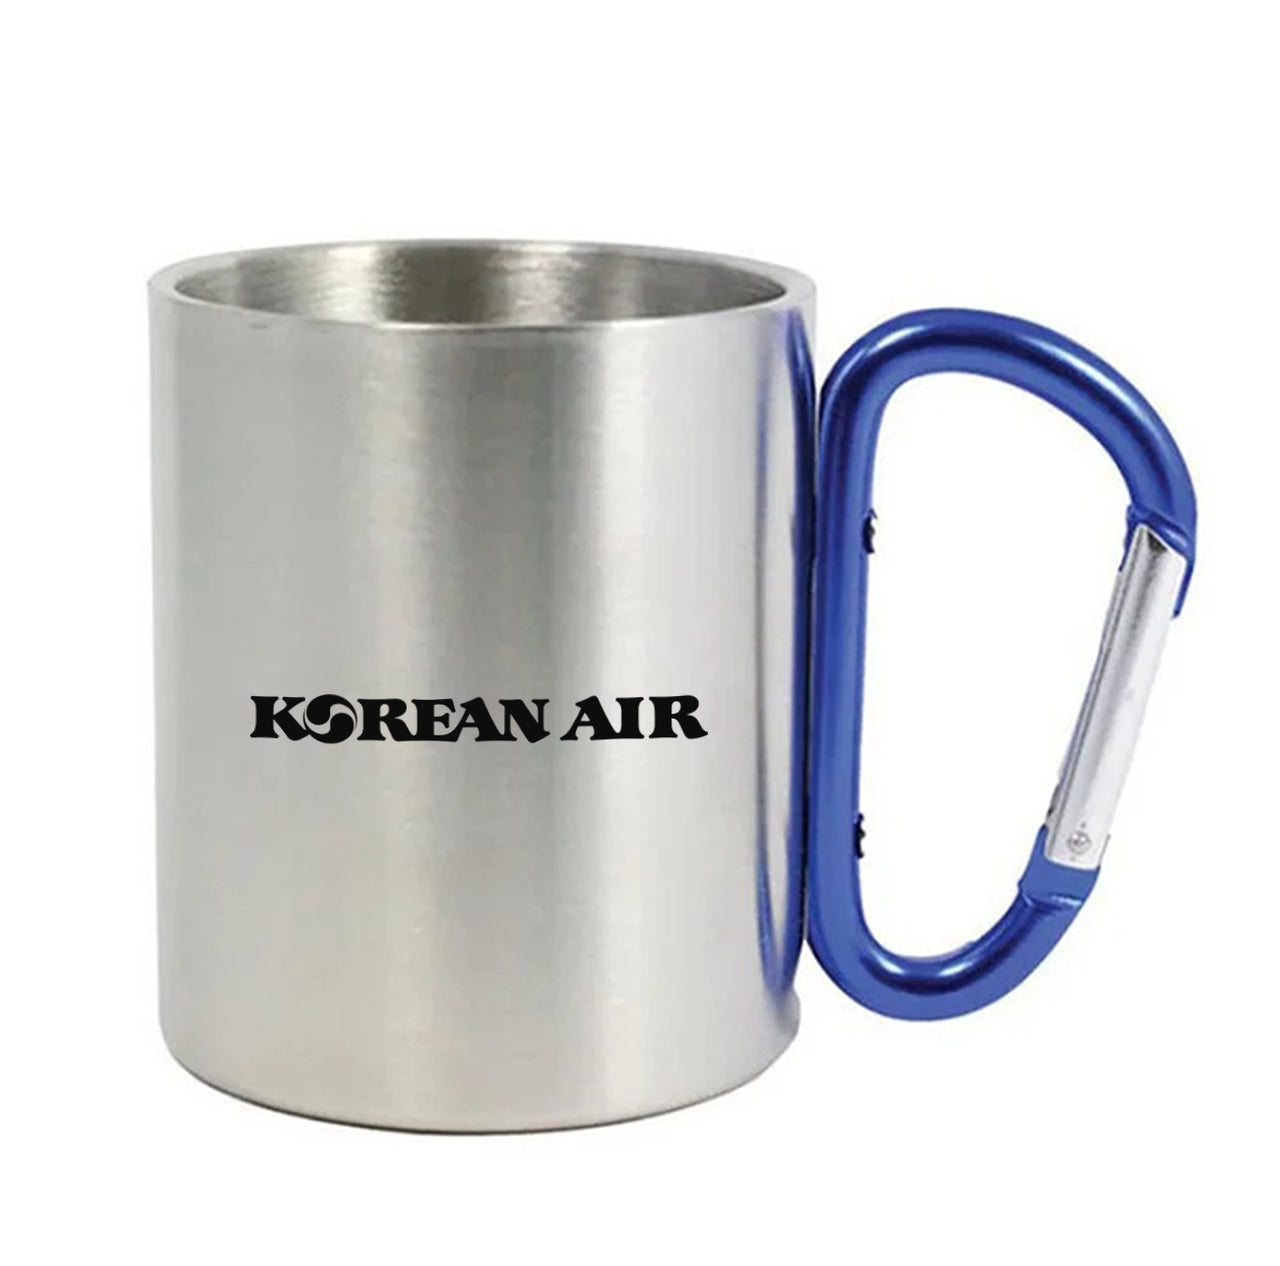 Korean Airlines Designed Stainless Steel Outdoors Mugs